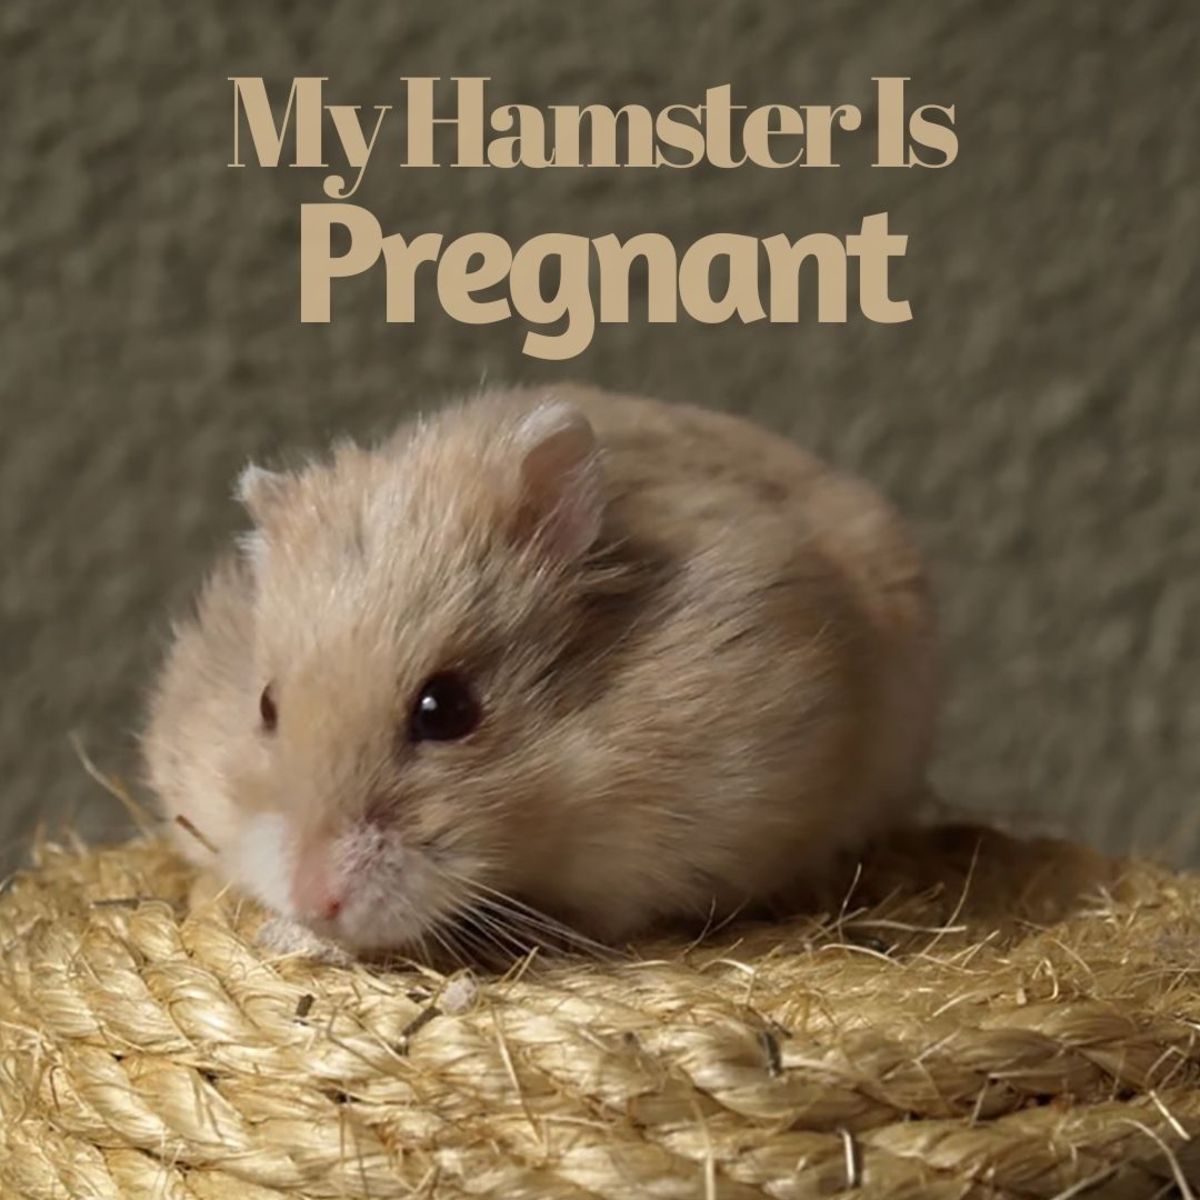 My Hamster Is Pregnant—Now What?